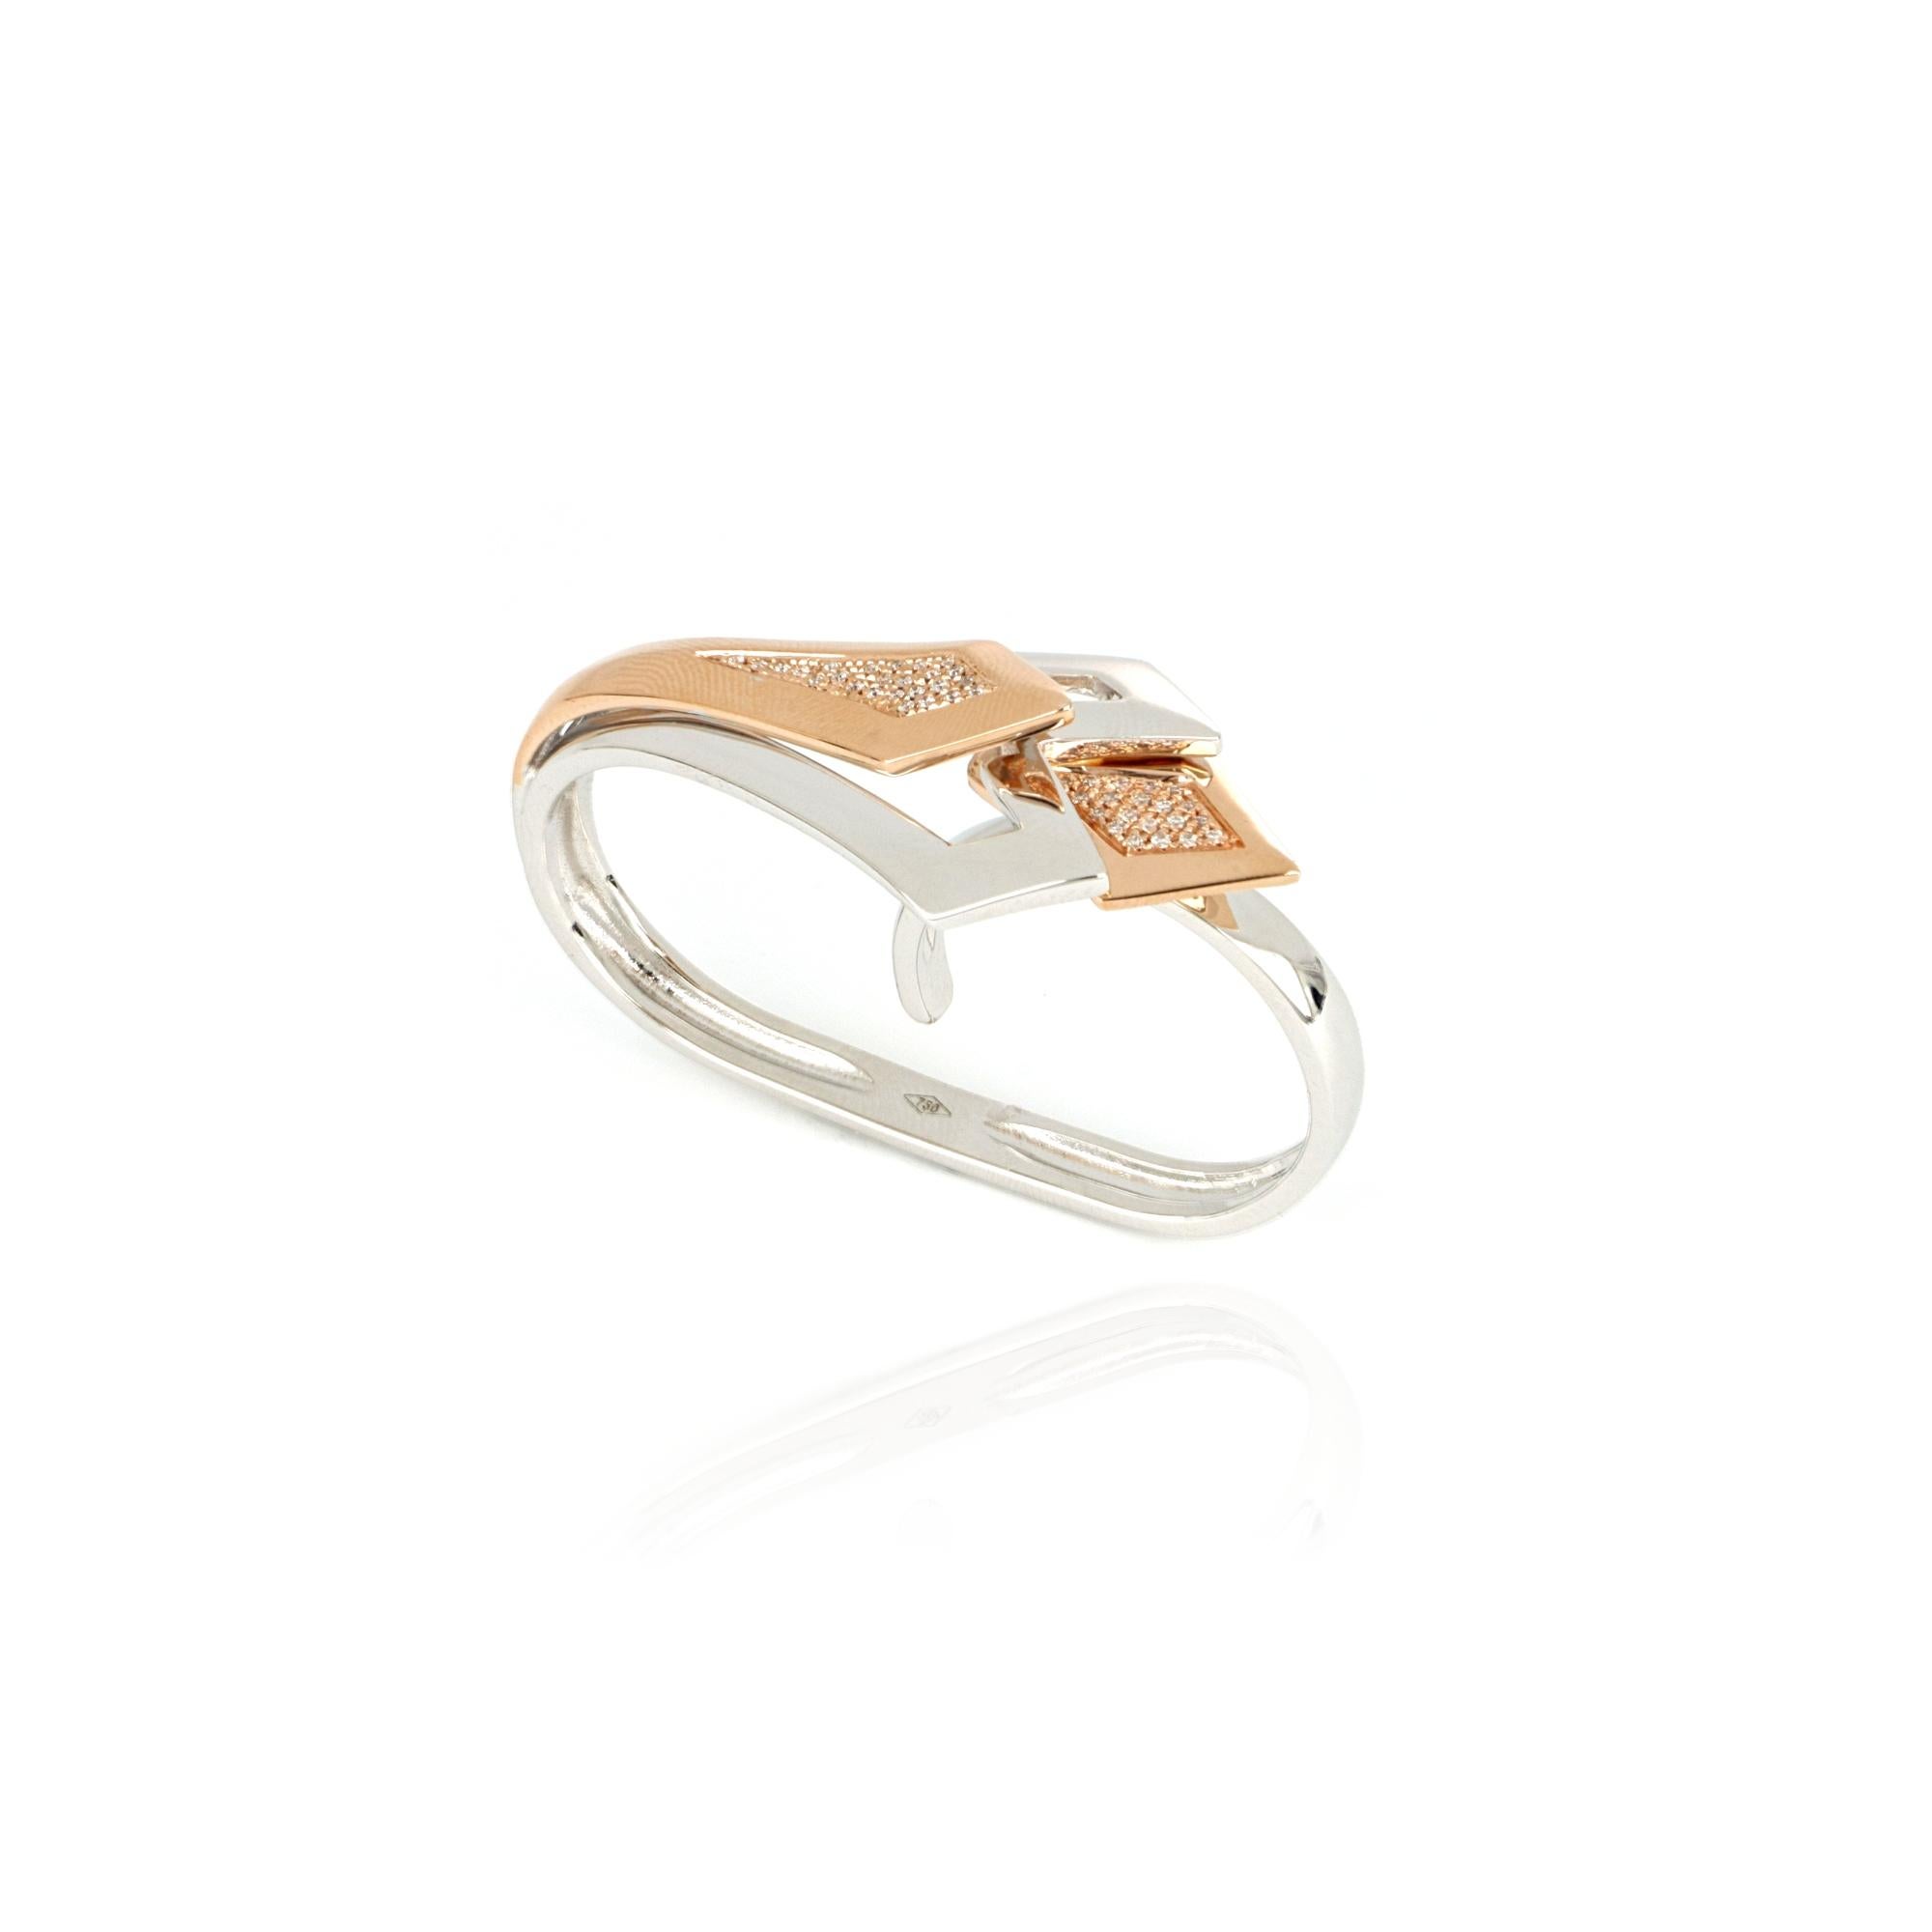 For Sale:  18kt White and Rose Gold 3 Chic Big Double Ring Enriched with Diamonds 3